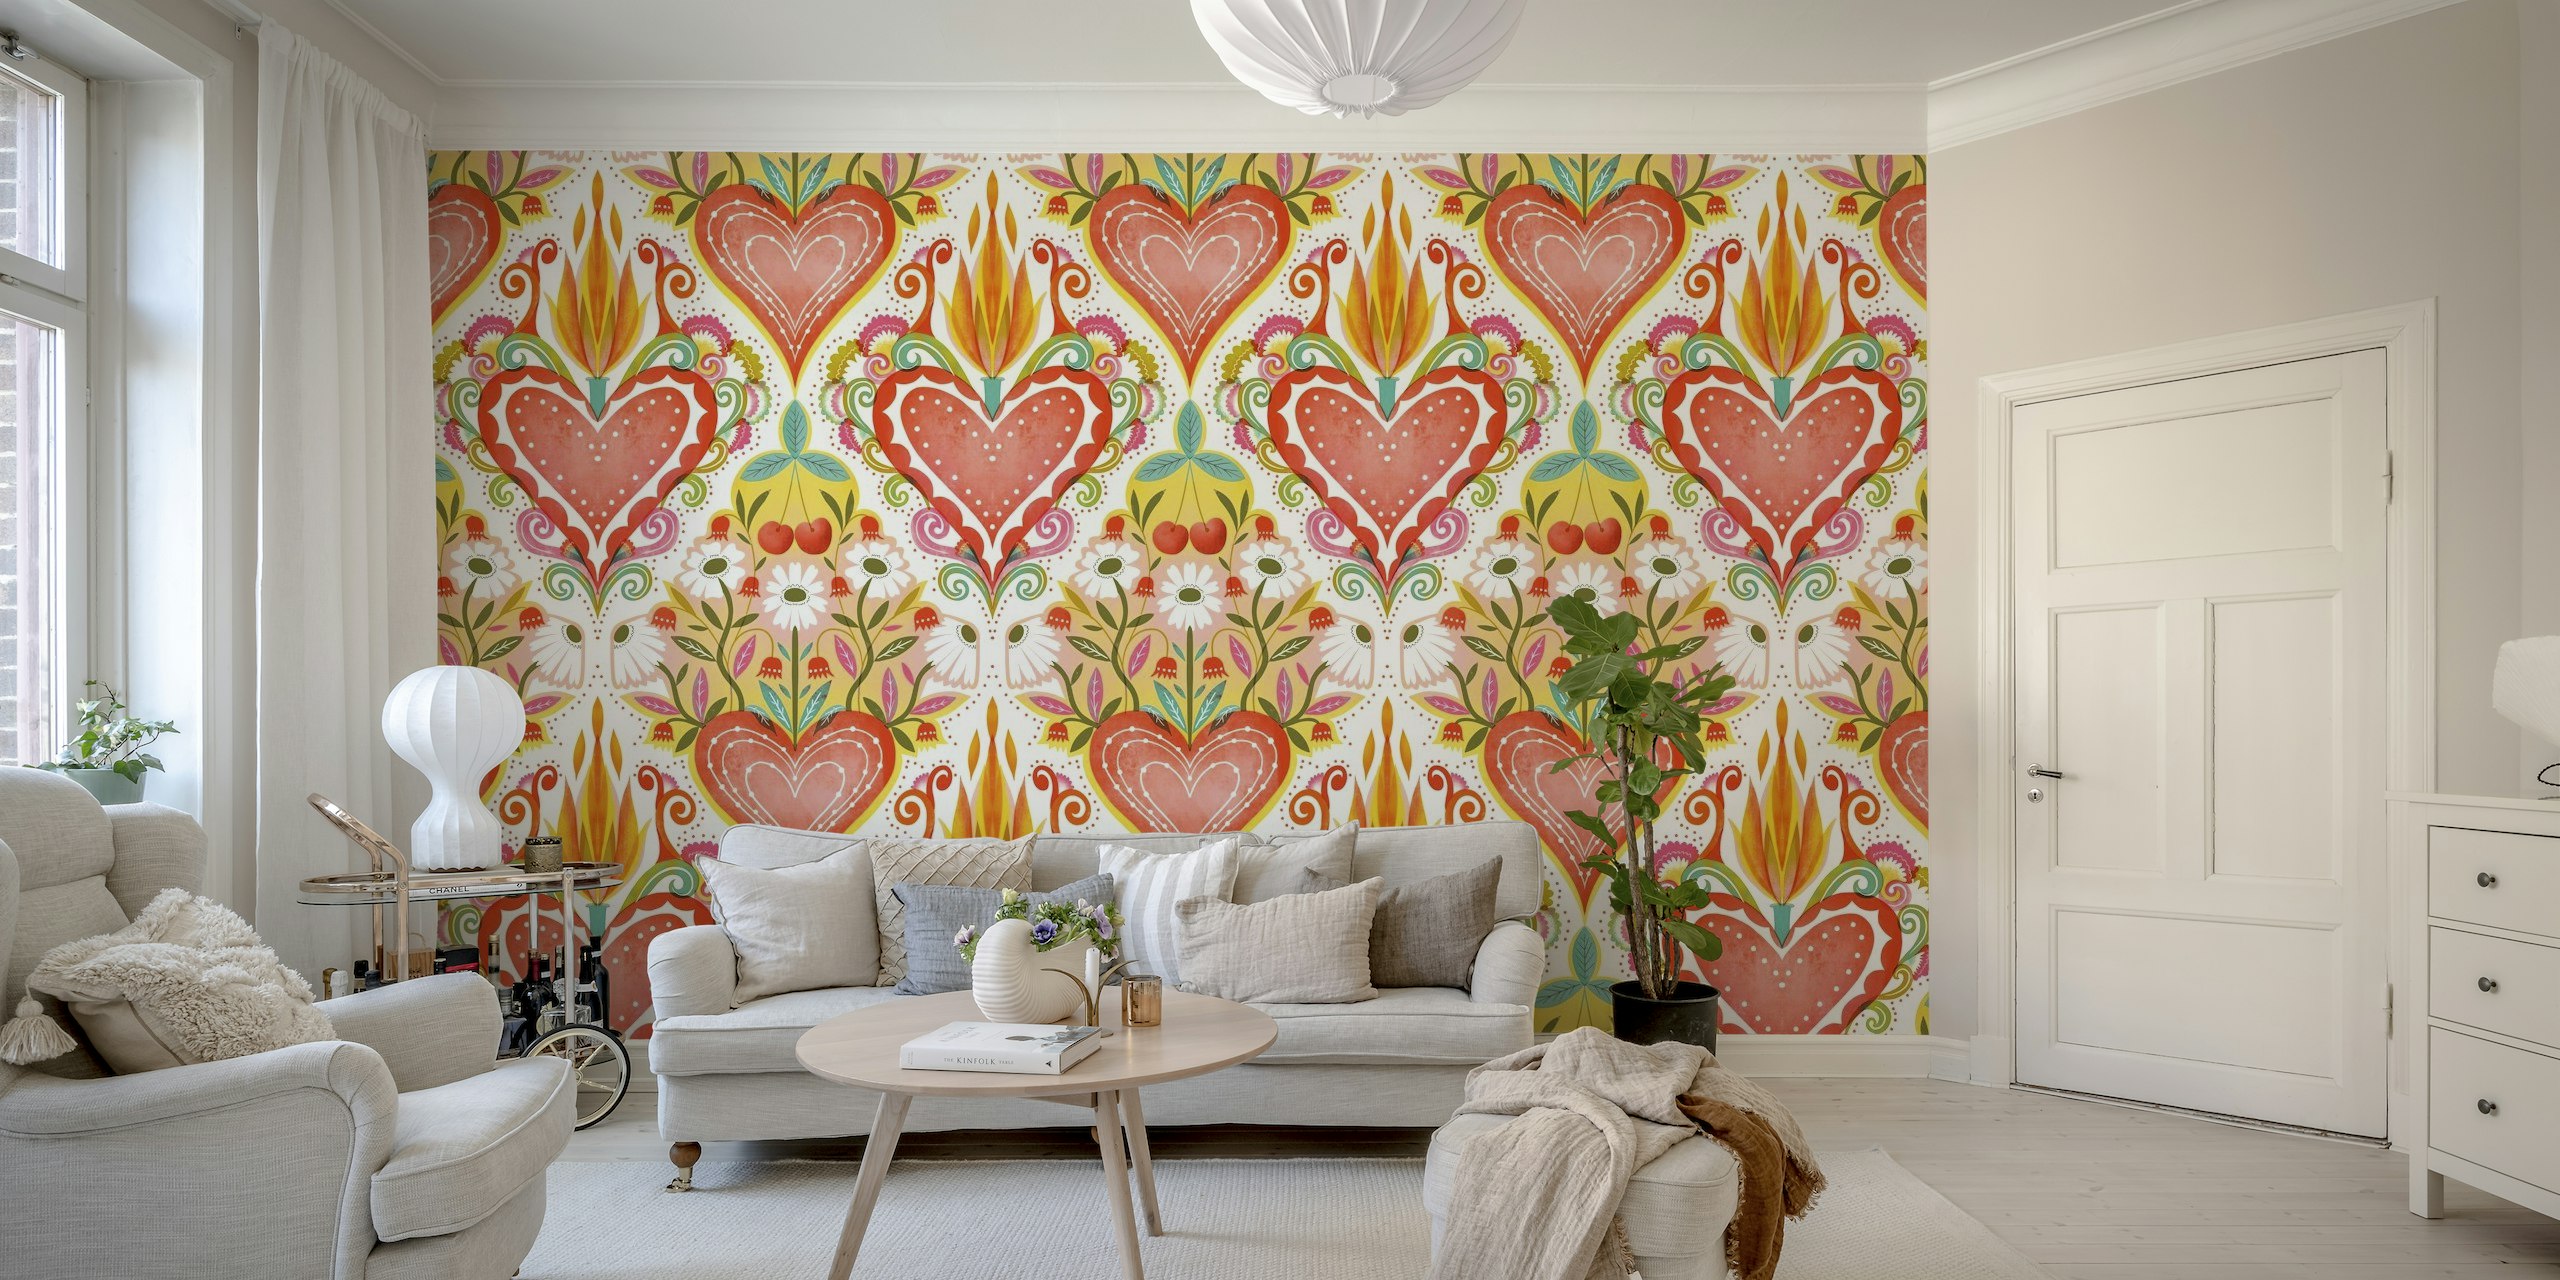 Colorful folk-inspired wall mural featuring a large central heart with flames and smaller surrounding hearts and floral patterns.